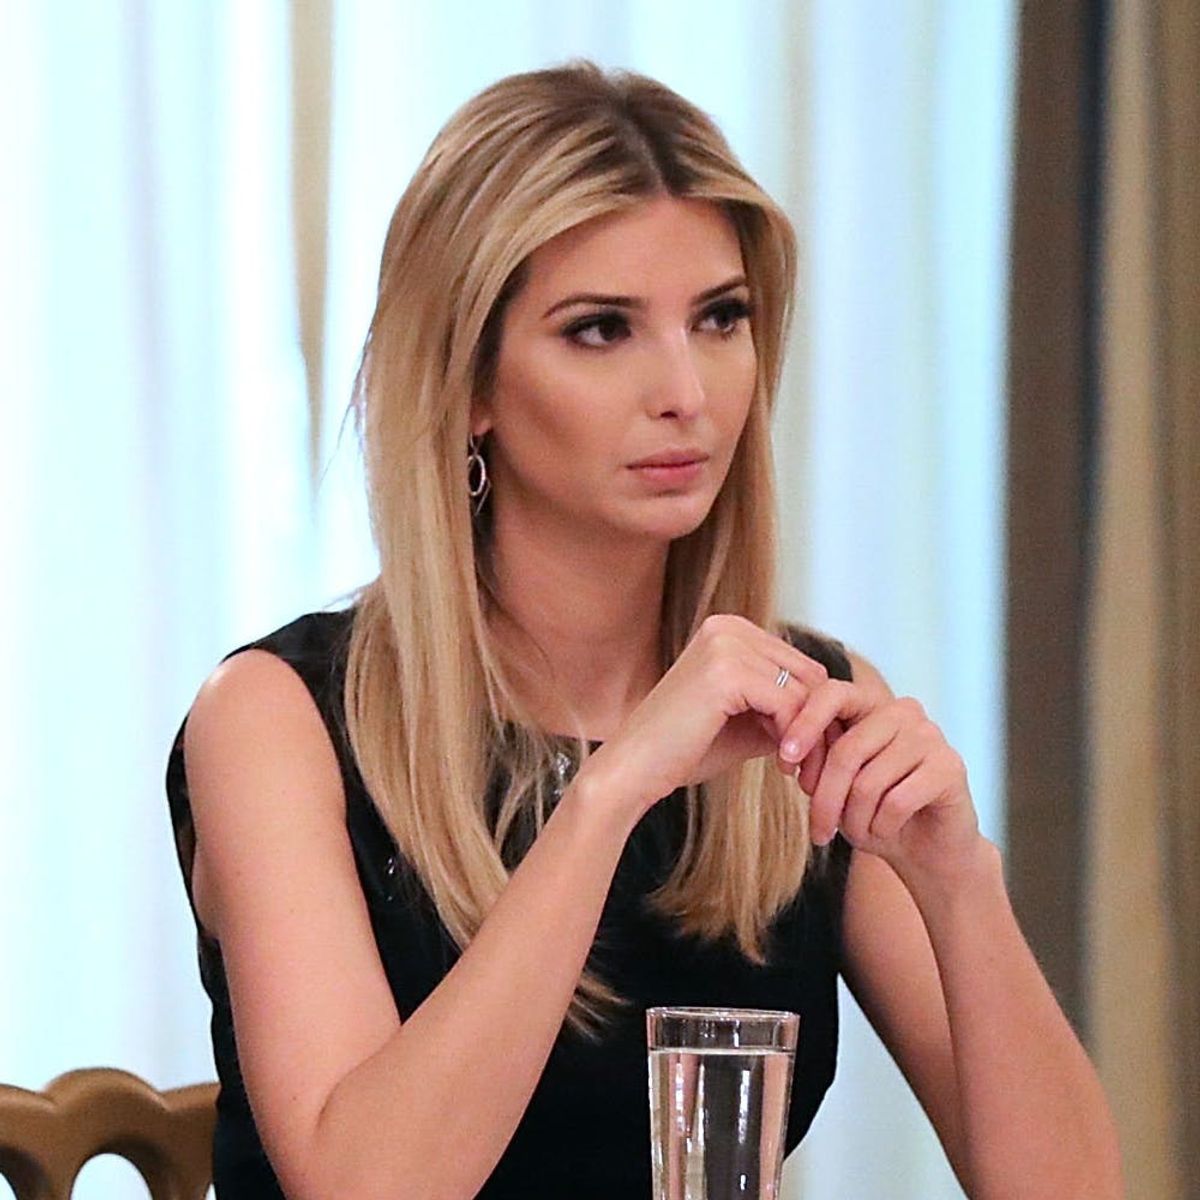 This Major Retailer Just Ordered Staff to Throw Away All Ivanka Trump Signage